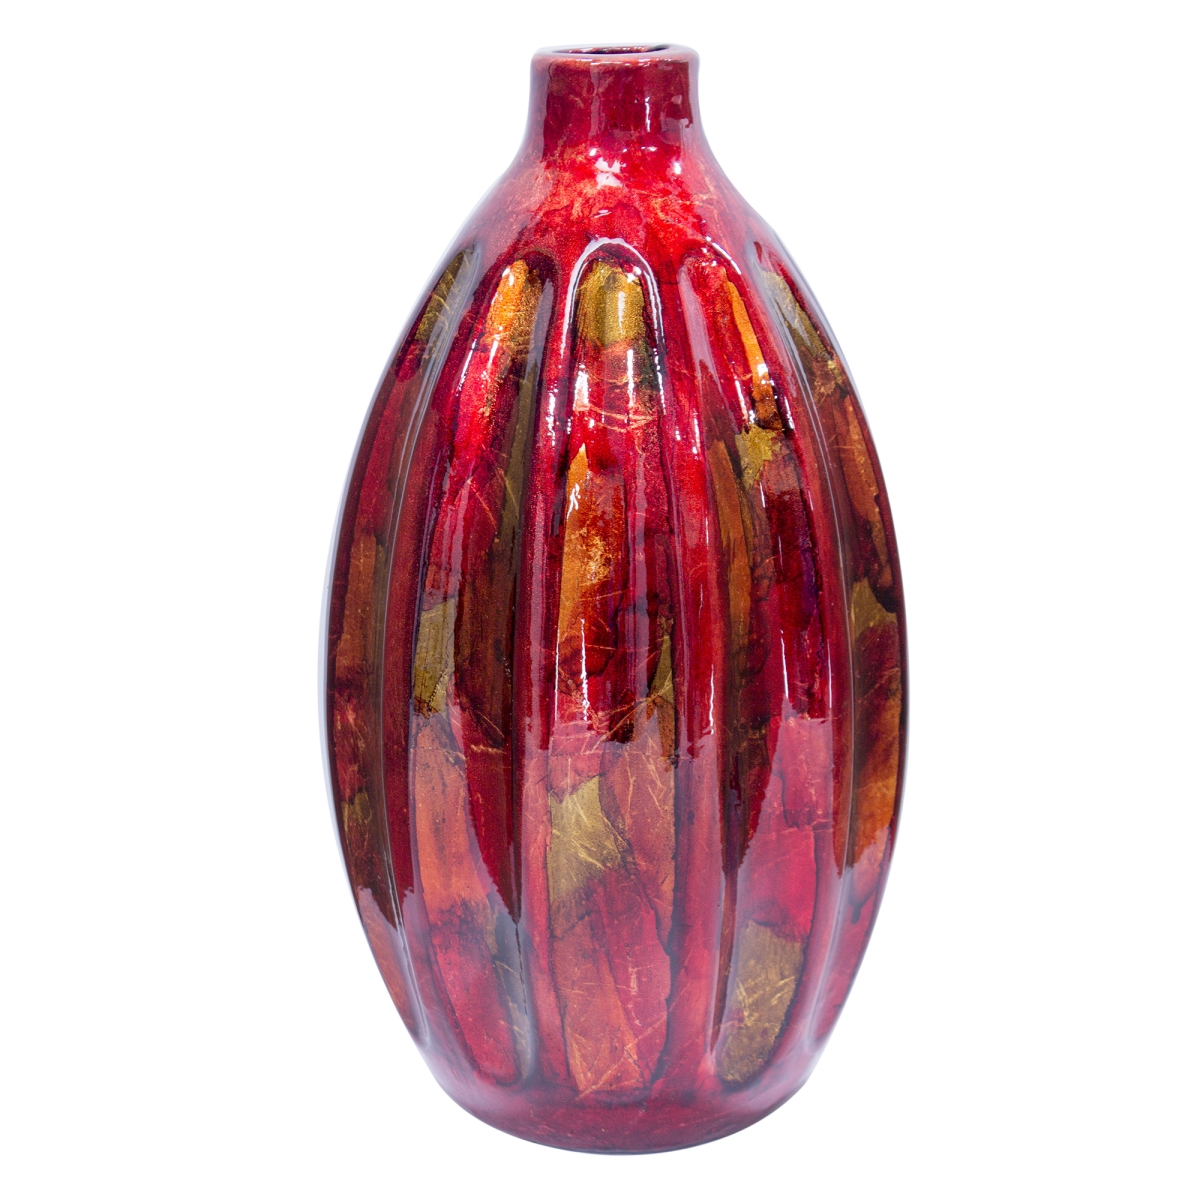 W08504-06 Brandy Foiled & Lacquered Ceramic Ridged Gourd Vase, Red